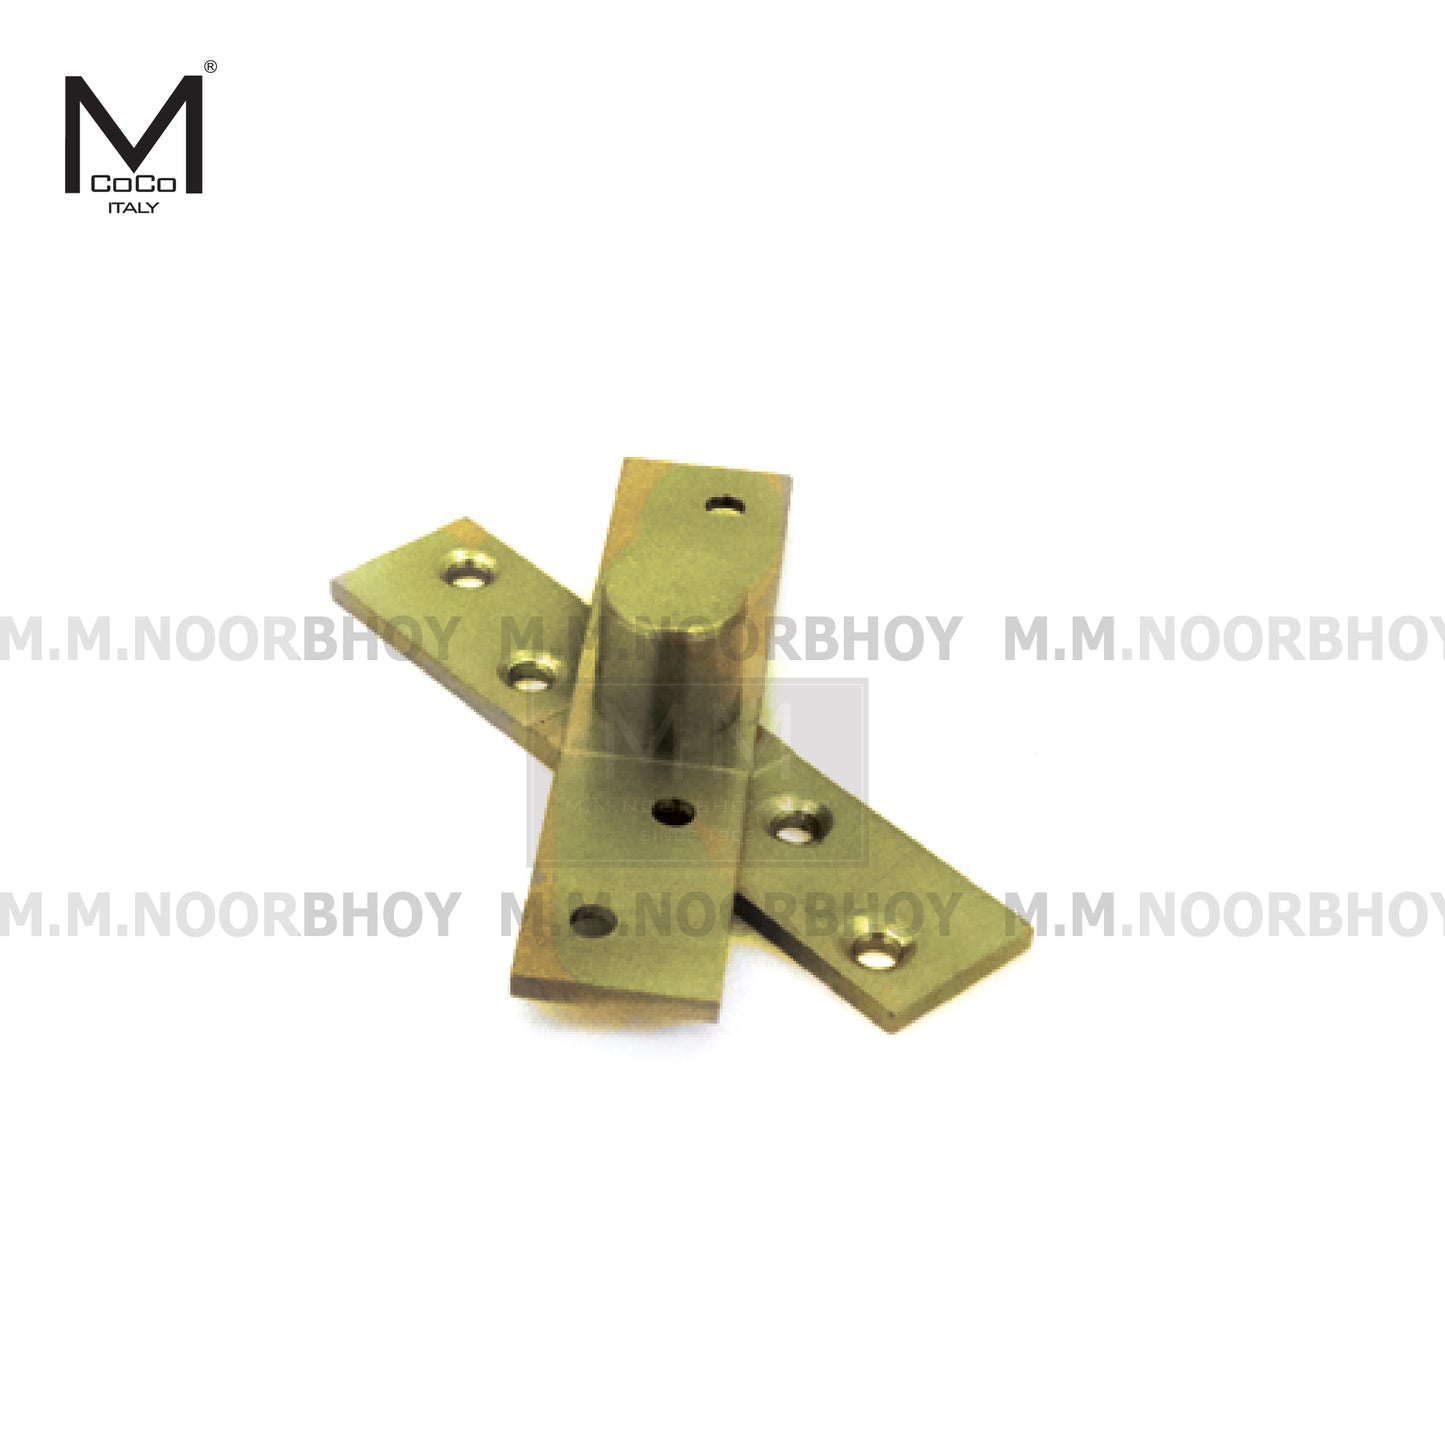 Mcoco Nurbi Centre Bearing Hinges Top & Bottom, 4 Inches, Antique Brass & Stainless Steel Finish - PIVOT4